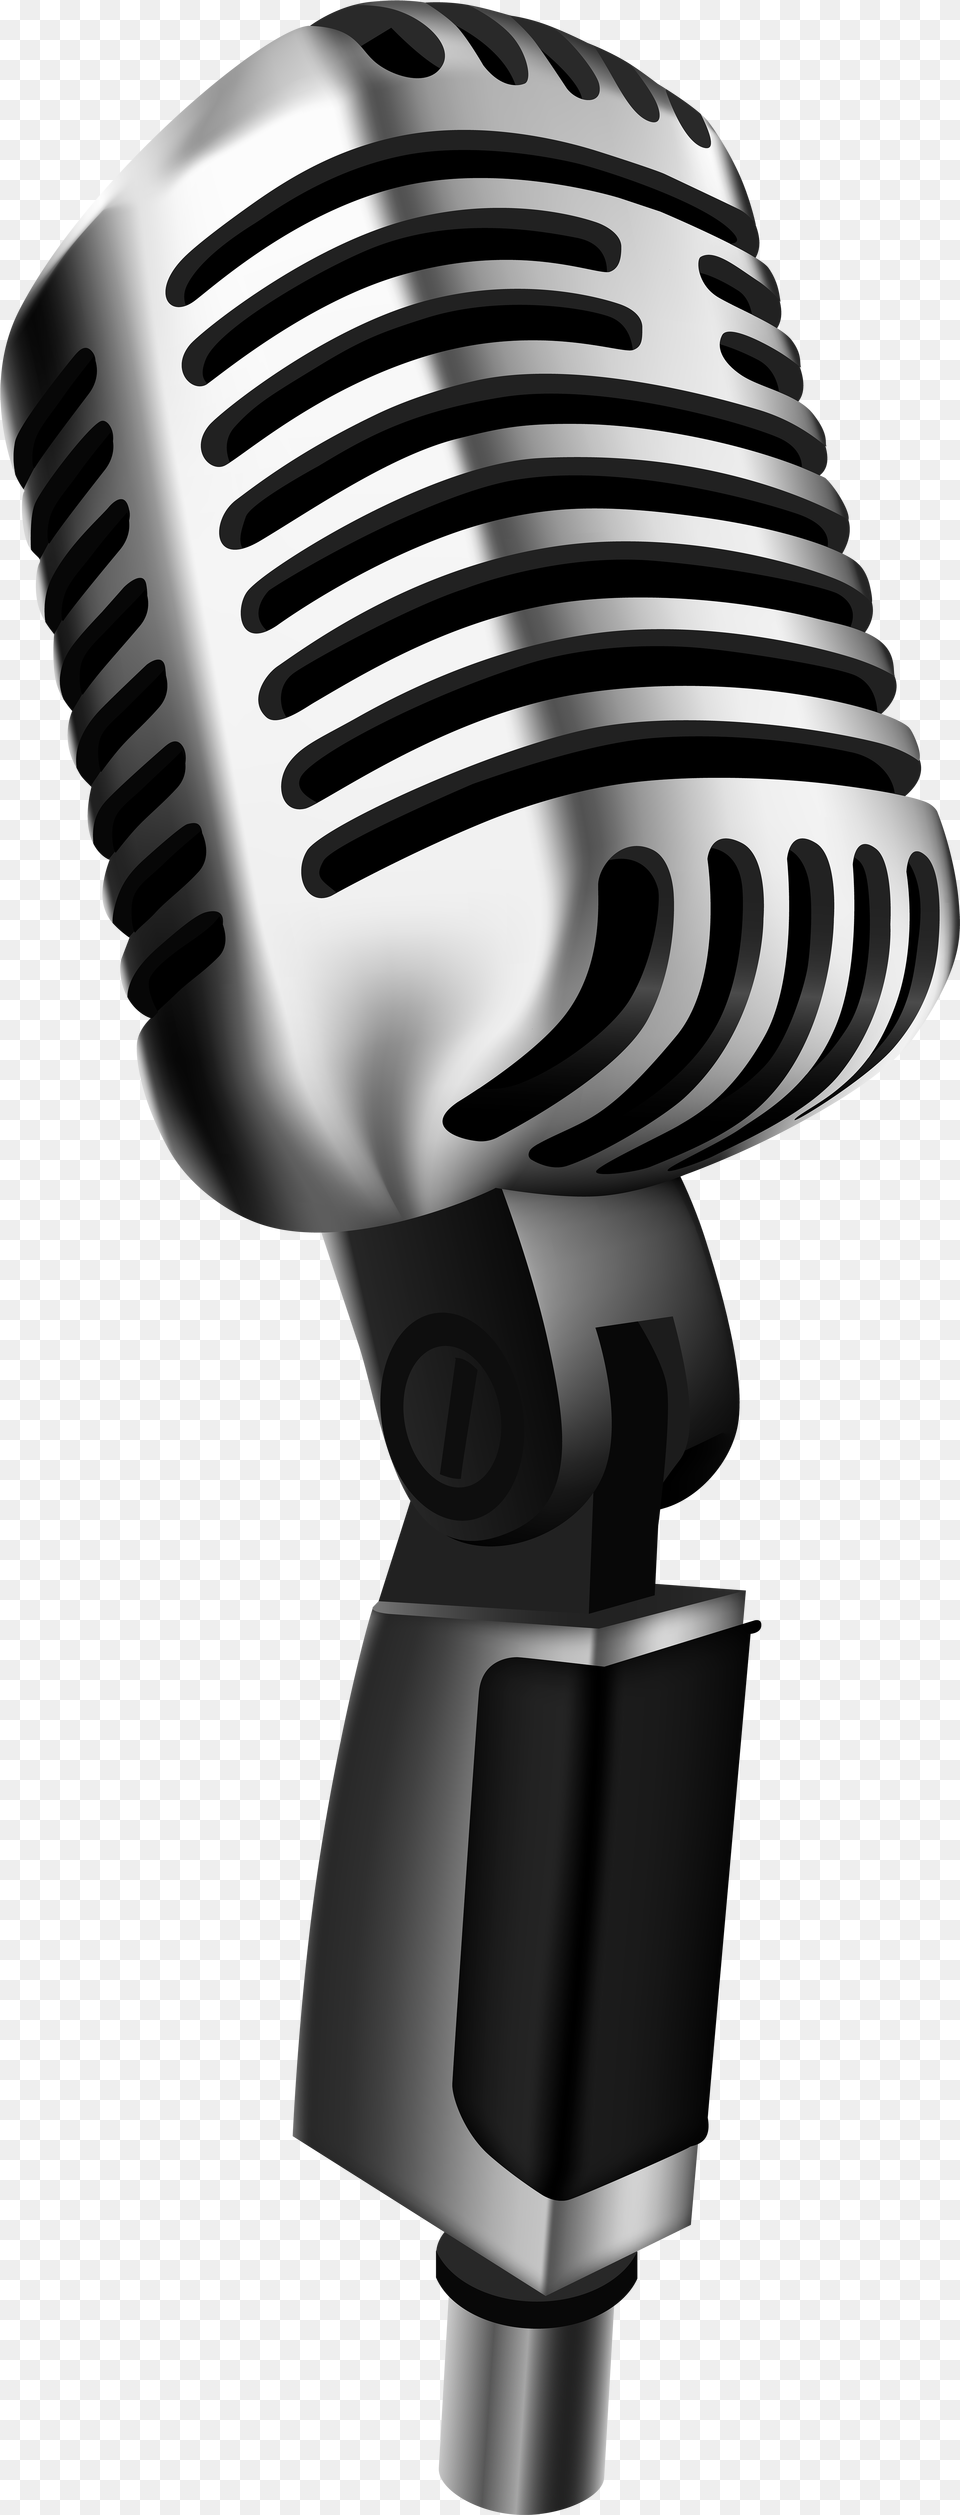 Microphone Clipart Transparent Background Transparent Microphone, Electrical Device, Person Png Image